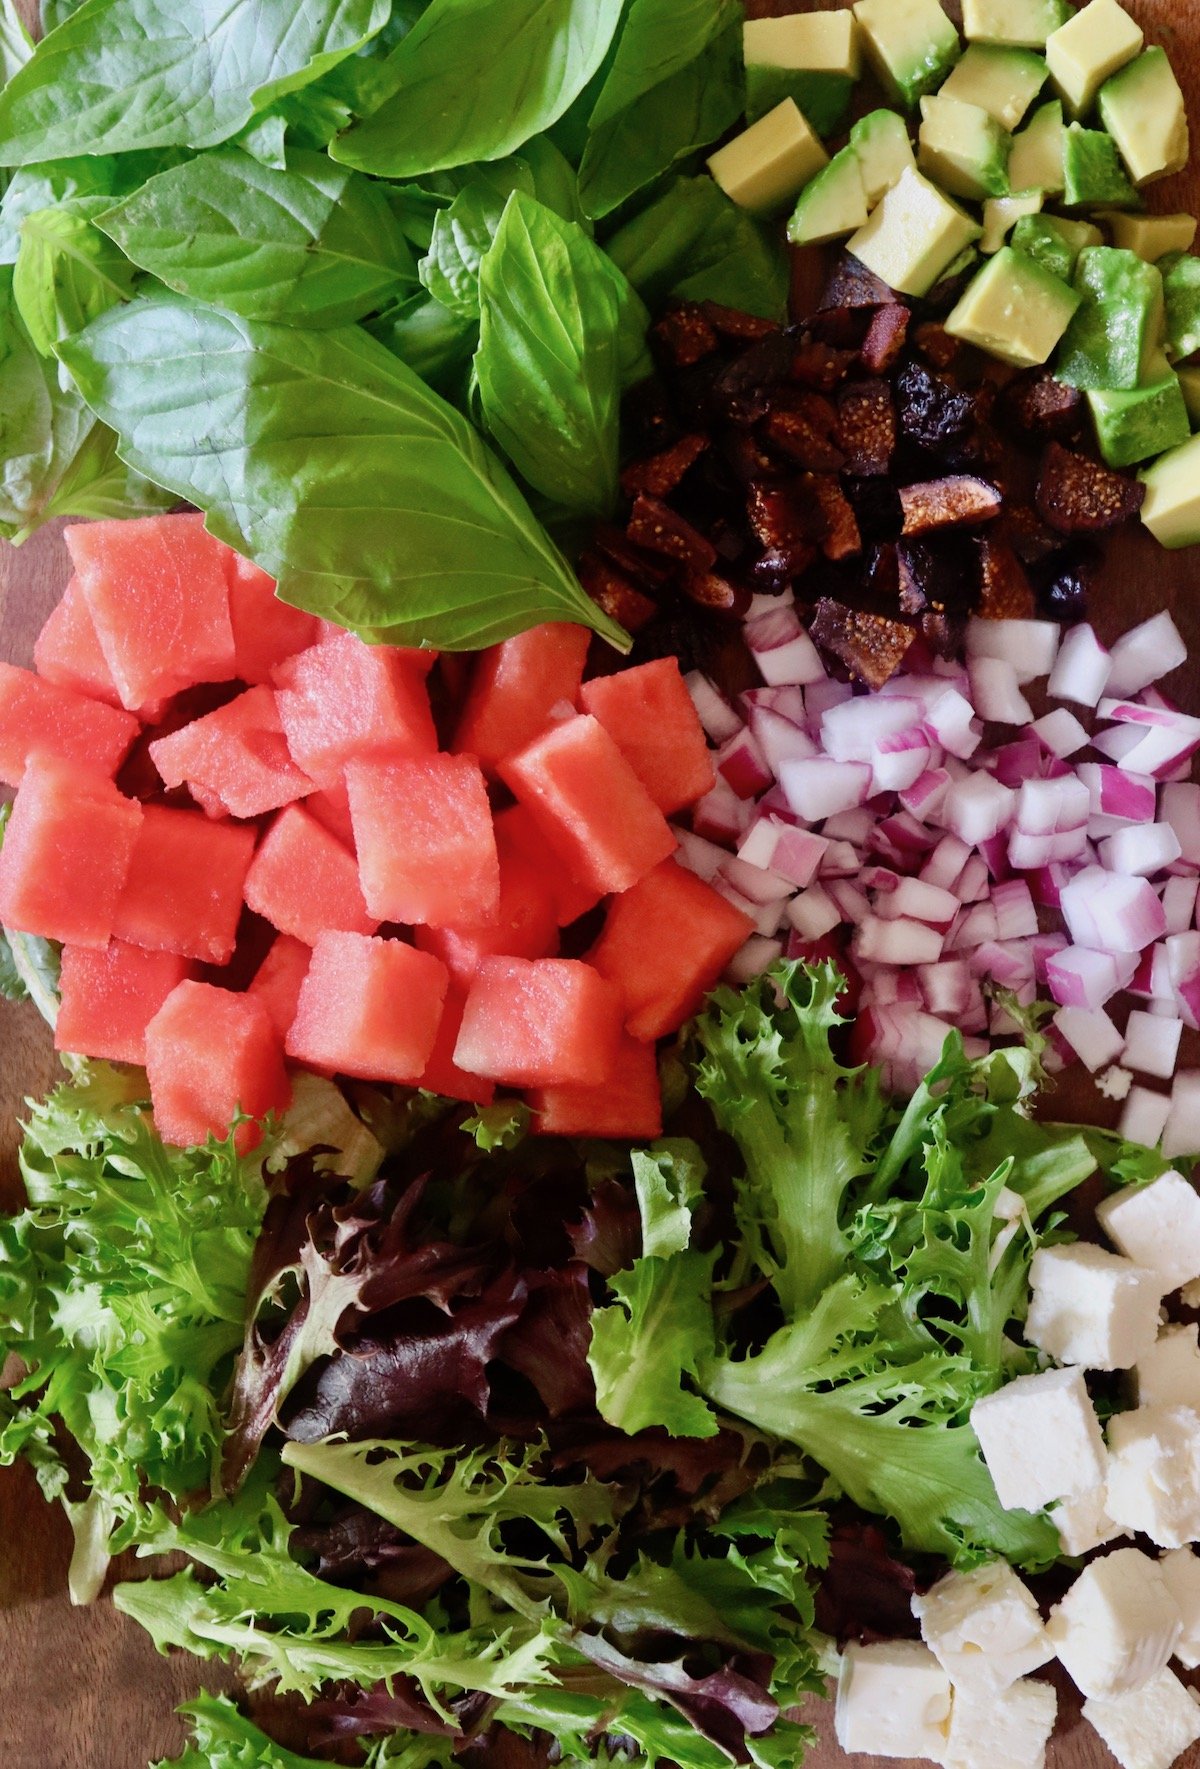 Chopped watermelon, feta, red onion, dried figs and lettuce and basil leaves on a cutting baord.